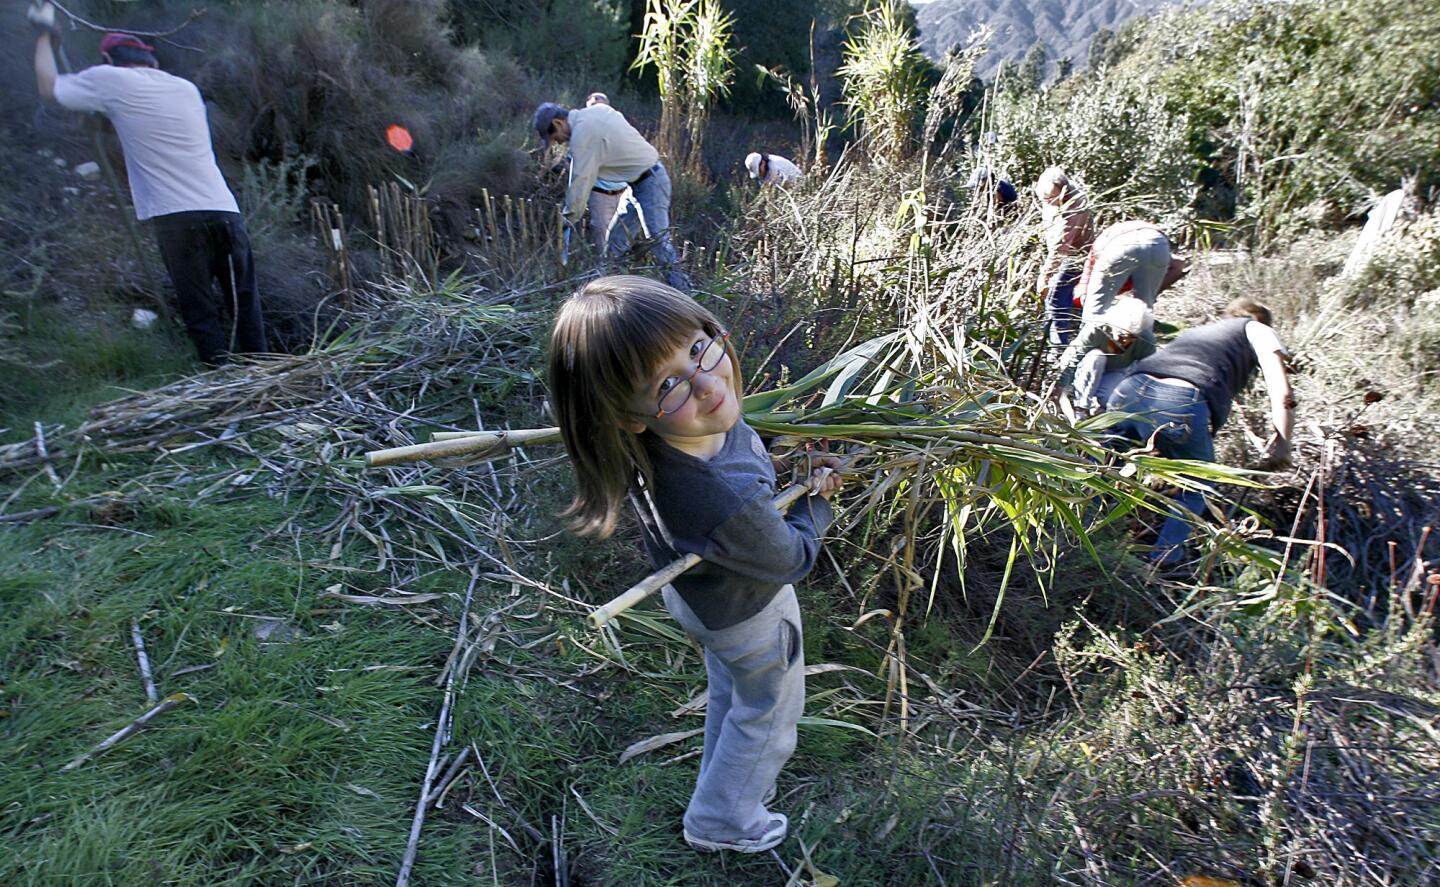 Molly Necus, 5, helps remove invasive non-native Arundo from the northern end of the Rosemont Preserve during volunteer clean up day at the La Crescenta open space at the end of Rosemont Ave. in La Crescenta on Saturday, November 24, 2012. About 15 volunteers came out to help remove invasive plants.